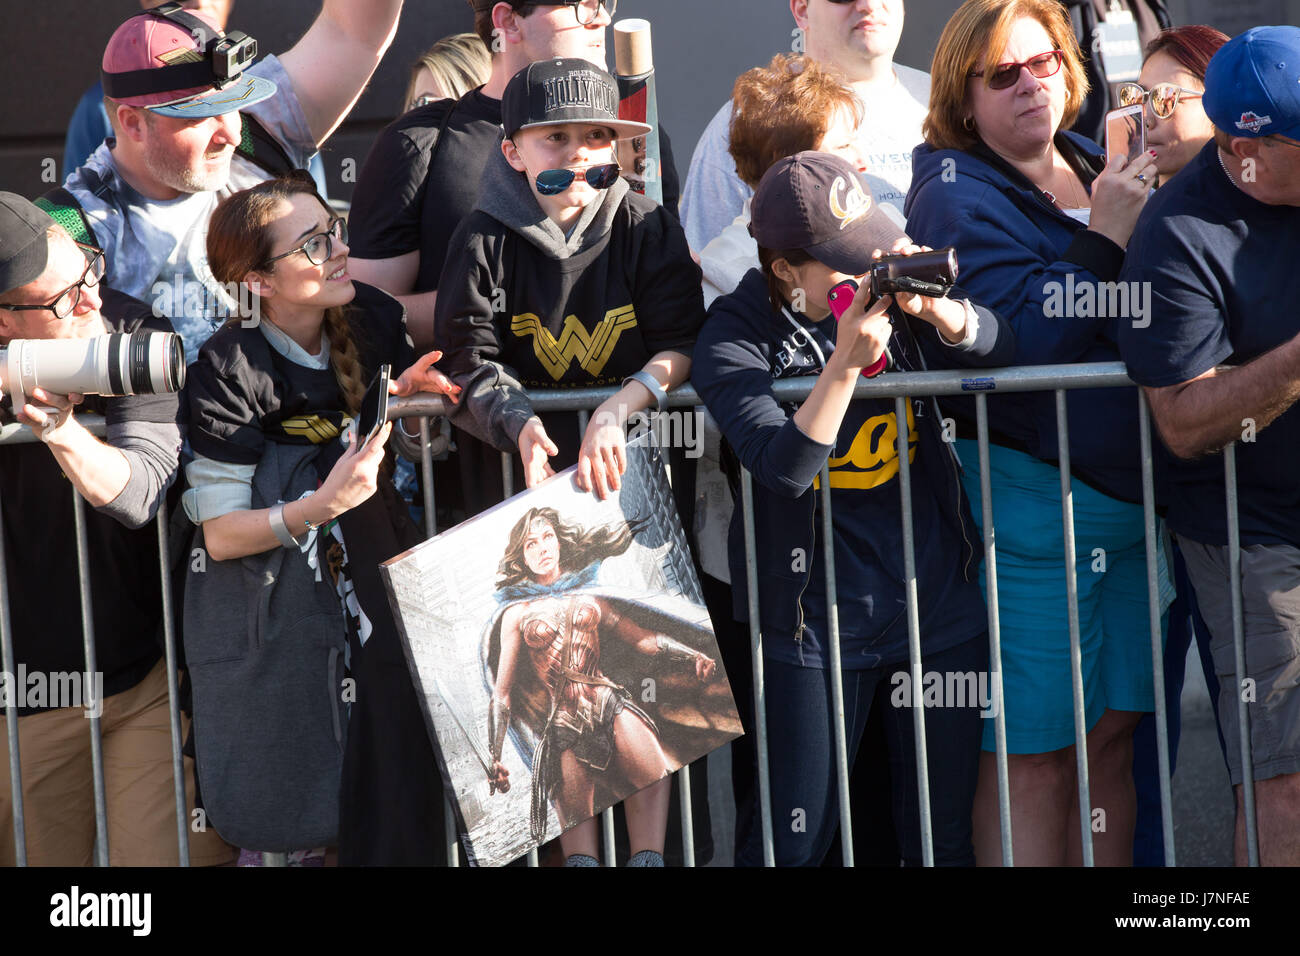 Hollywood, California, USA. 25th May, 2017. Atmosphere at the Premiere of Warner Bros. Pictures' 'Wonder Woman' at the Pantages Theatre on May 25, 2017 in Hollywood, California. Credit: The Photo Access/Alamy Live News Stock Photo